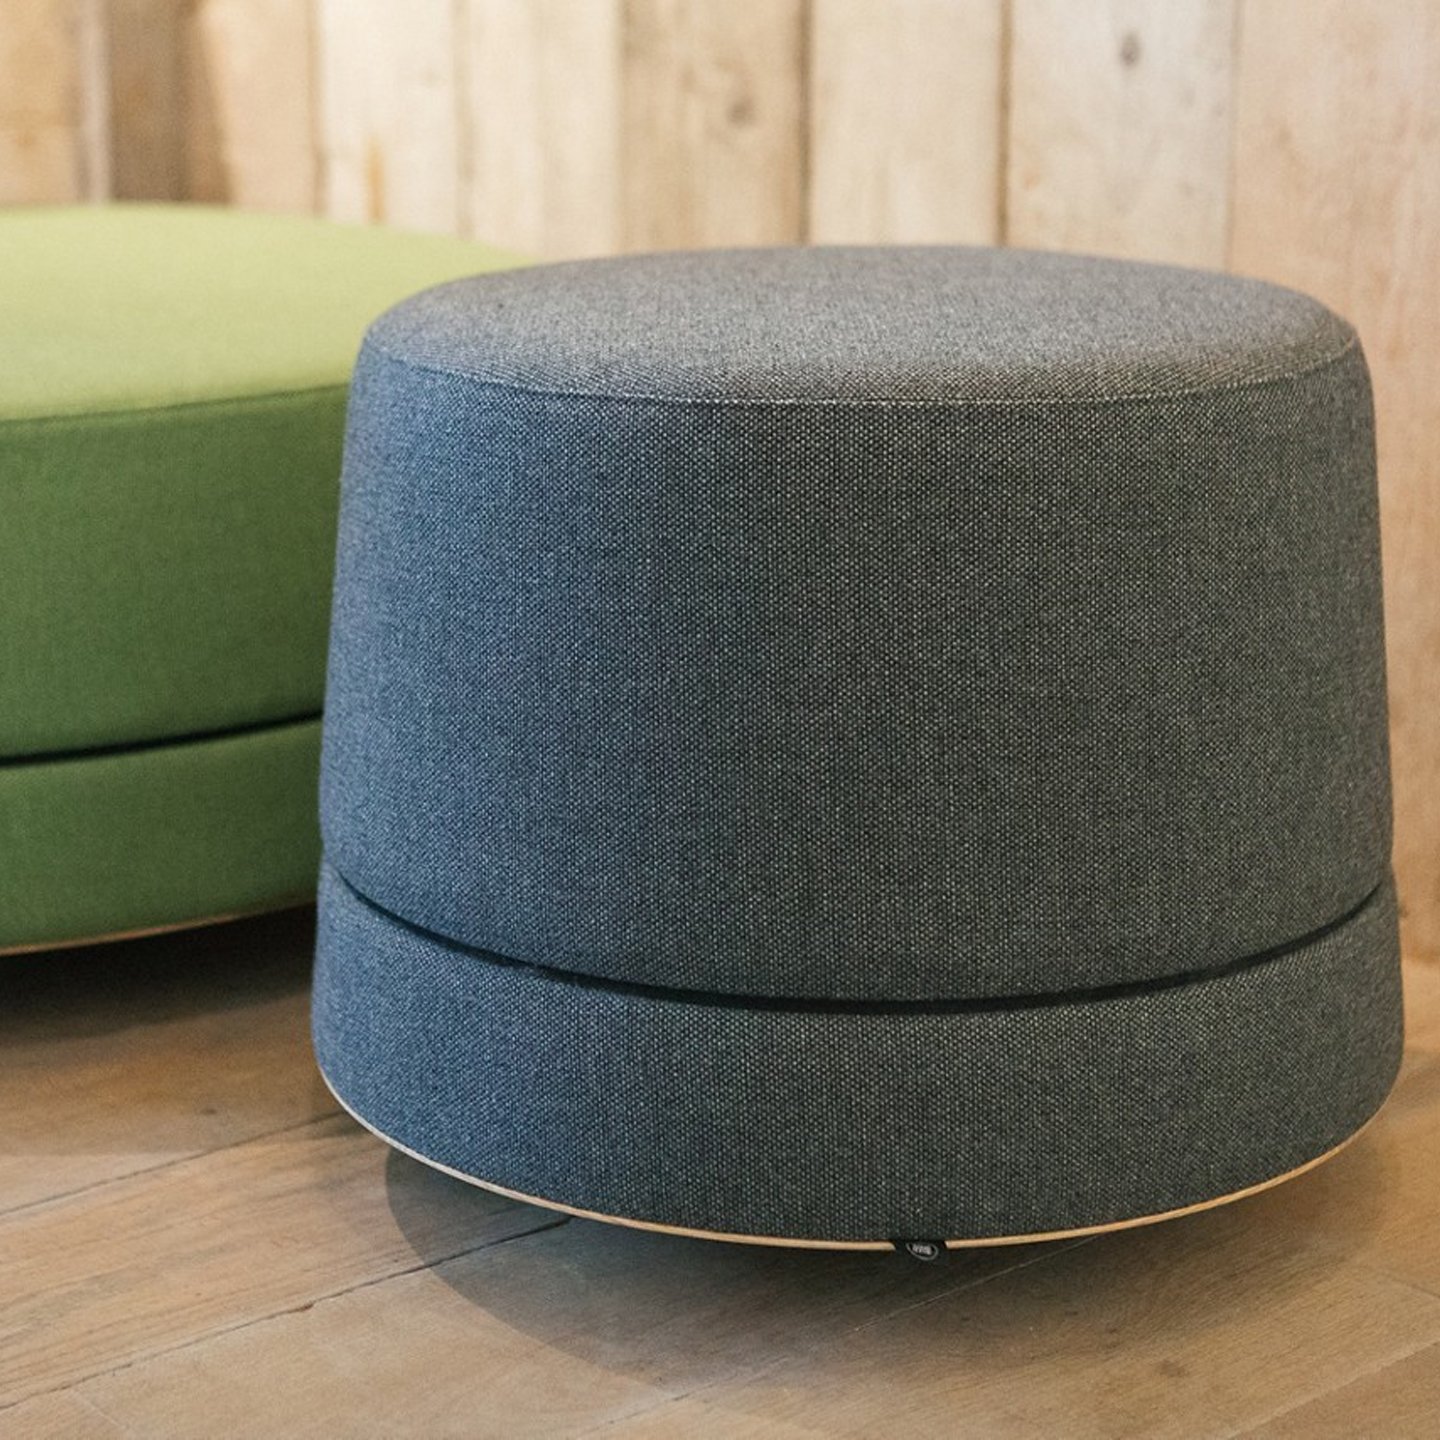 Haworth Buzzibalance poufs in grey and green colors offering acoustic performance and movement activator features